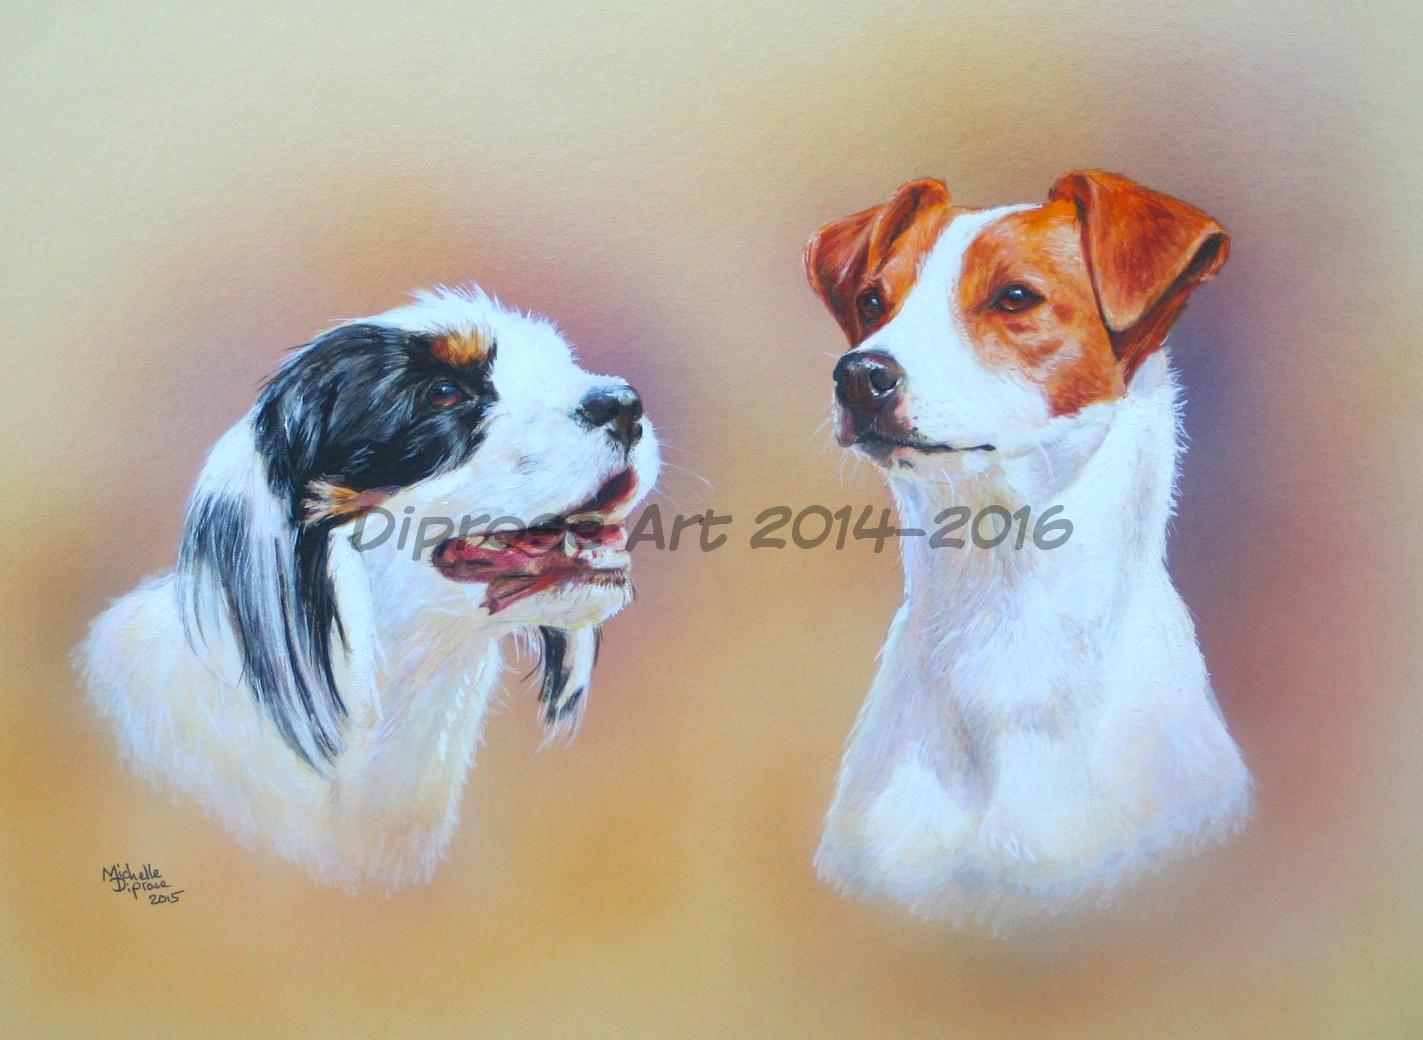 Acrylics on board - approx A3 - pet dogs portrait - I&#039;ve actually already done a portrait of Skye the Spaniel x before but his is a side view of her with her Jack Russell best friend 